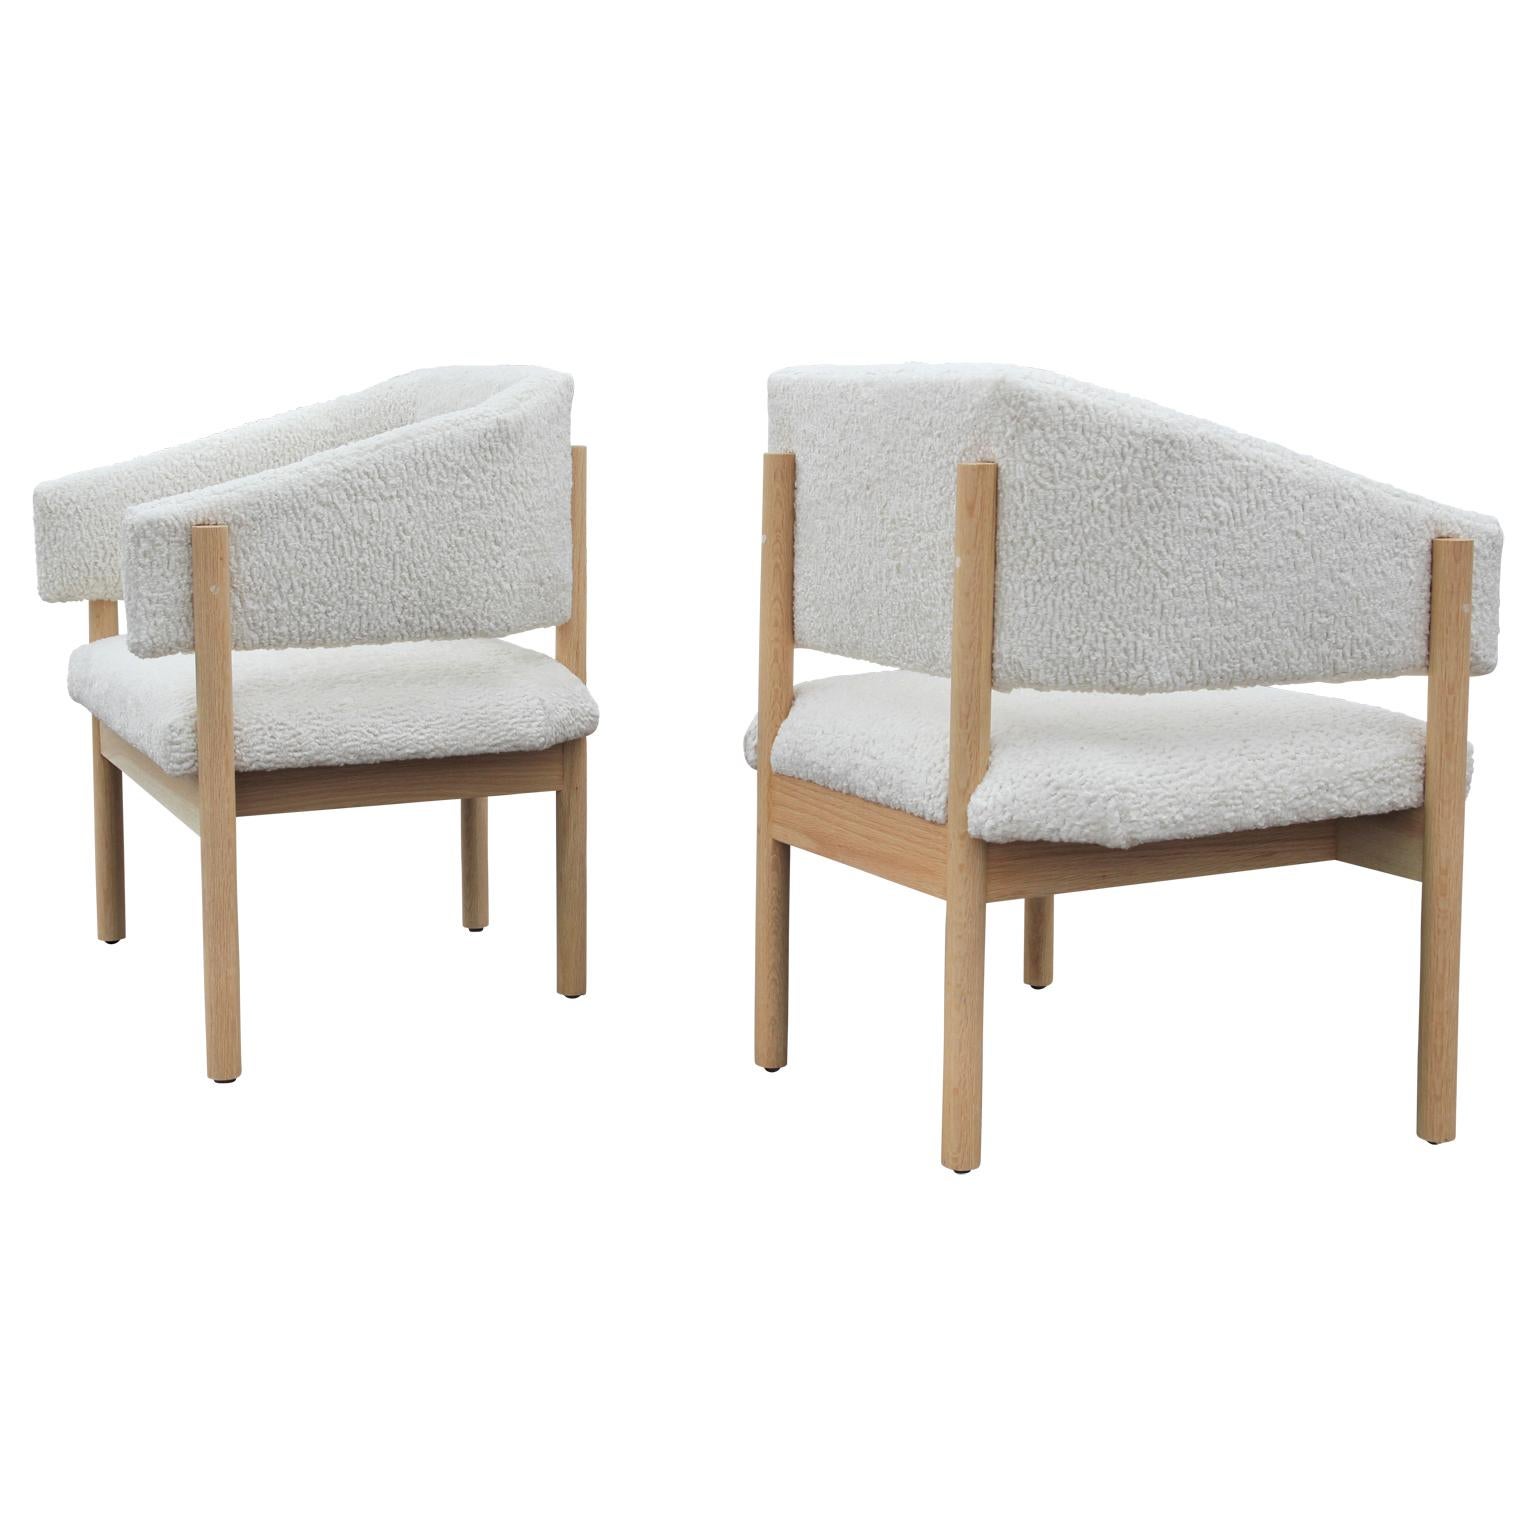 Pair of custom Angular Post-Modern Shearling & bleached white oak lounge chairs. More finishes and fabric available. Shearling style fabric is from Kravet. 
 

Measures: Seat height - H 16 in. 
Arm height - H 24 in.